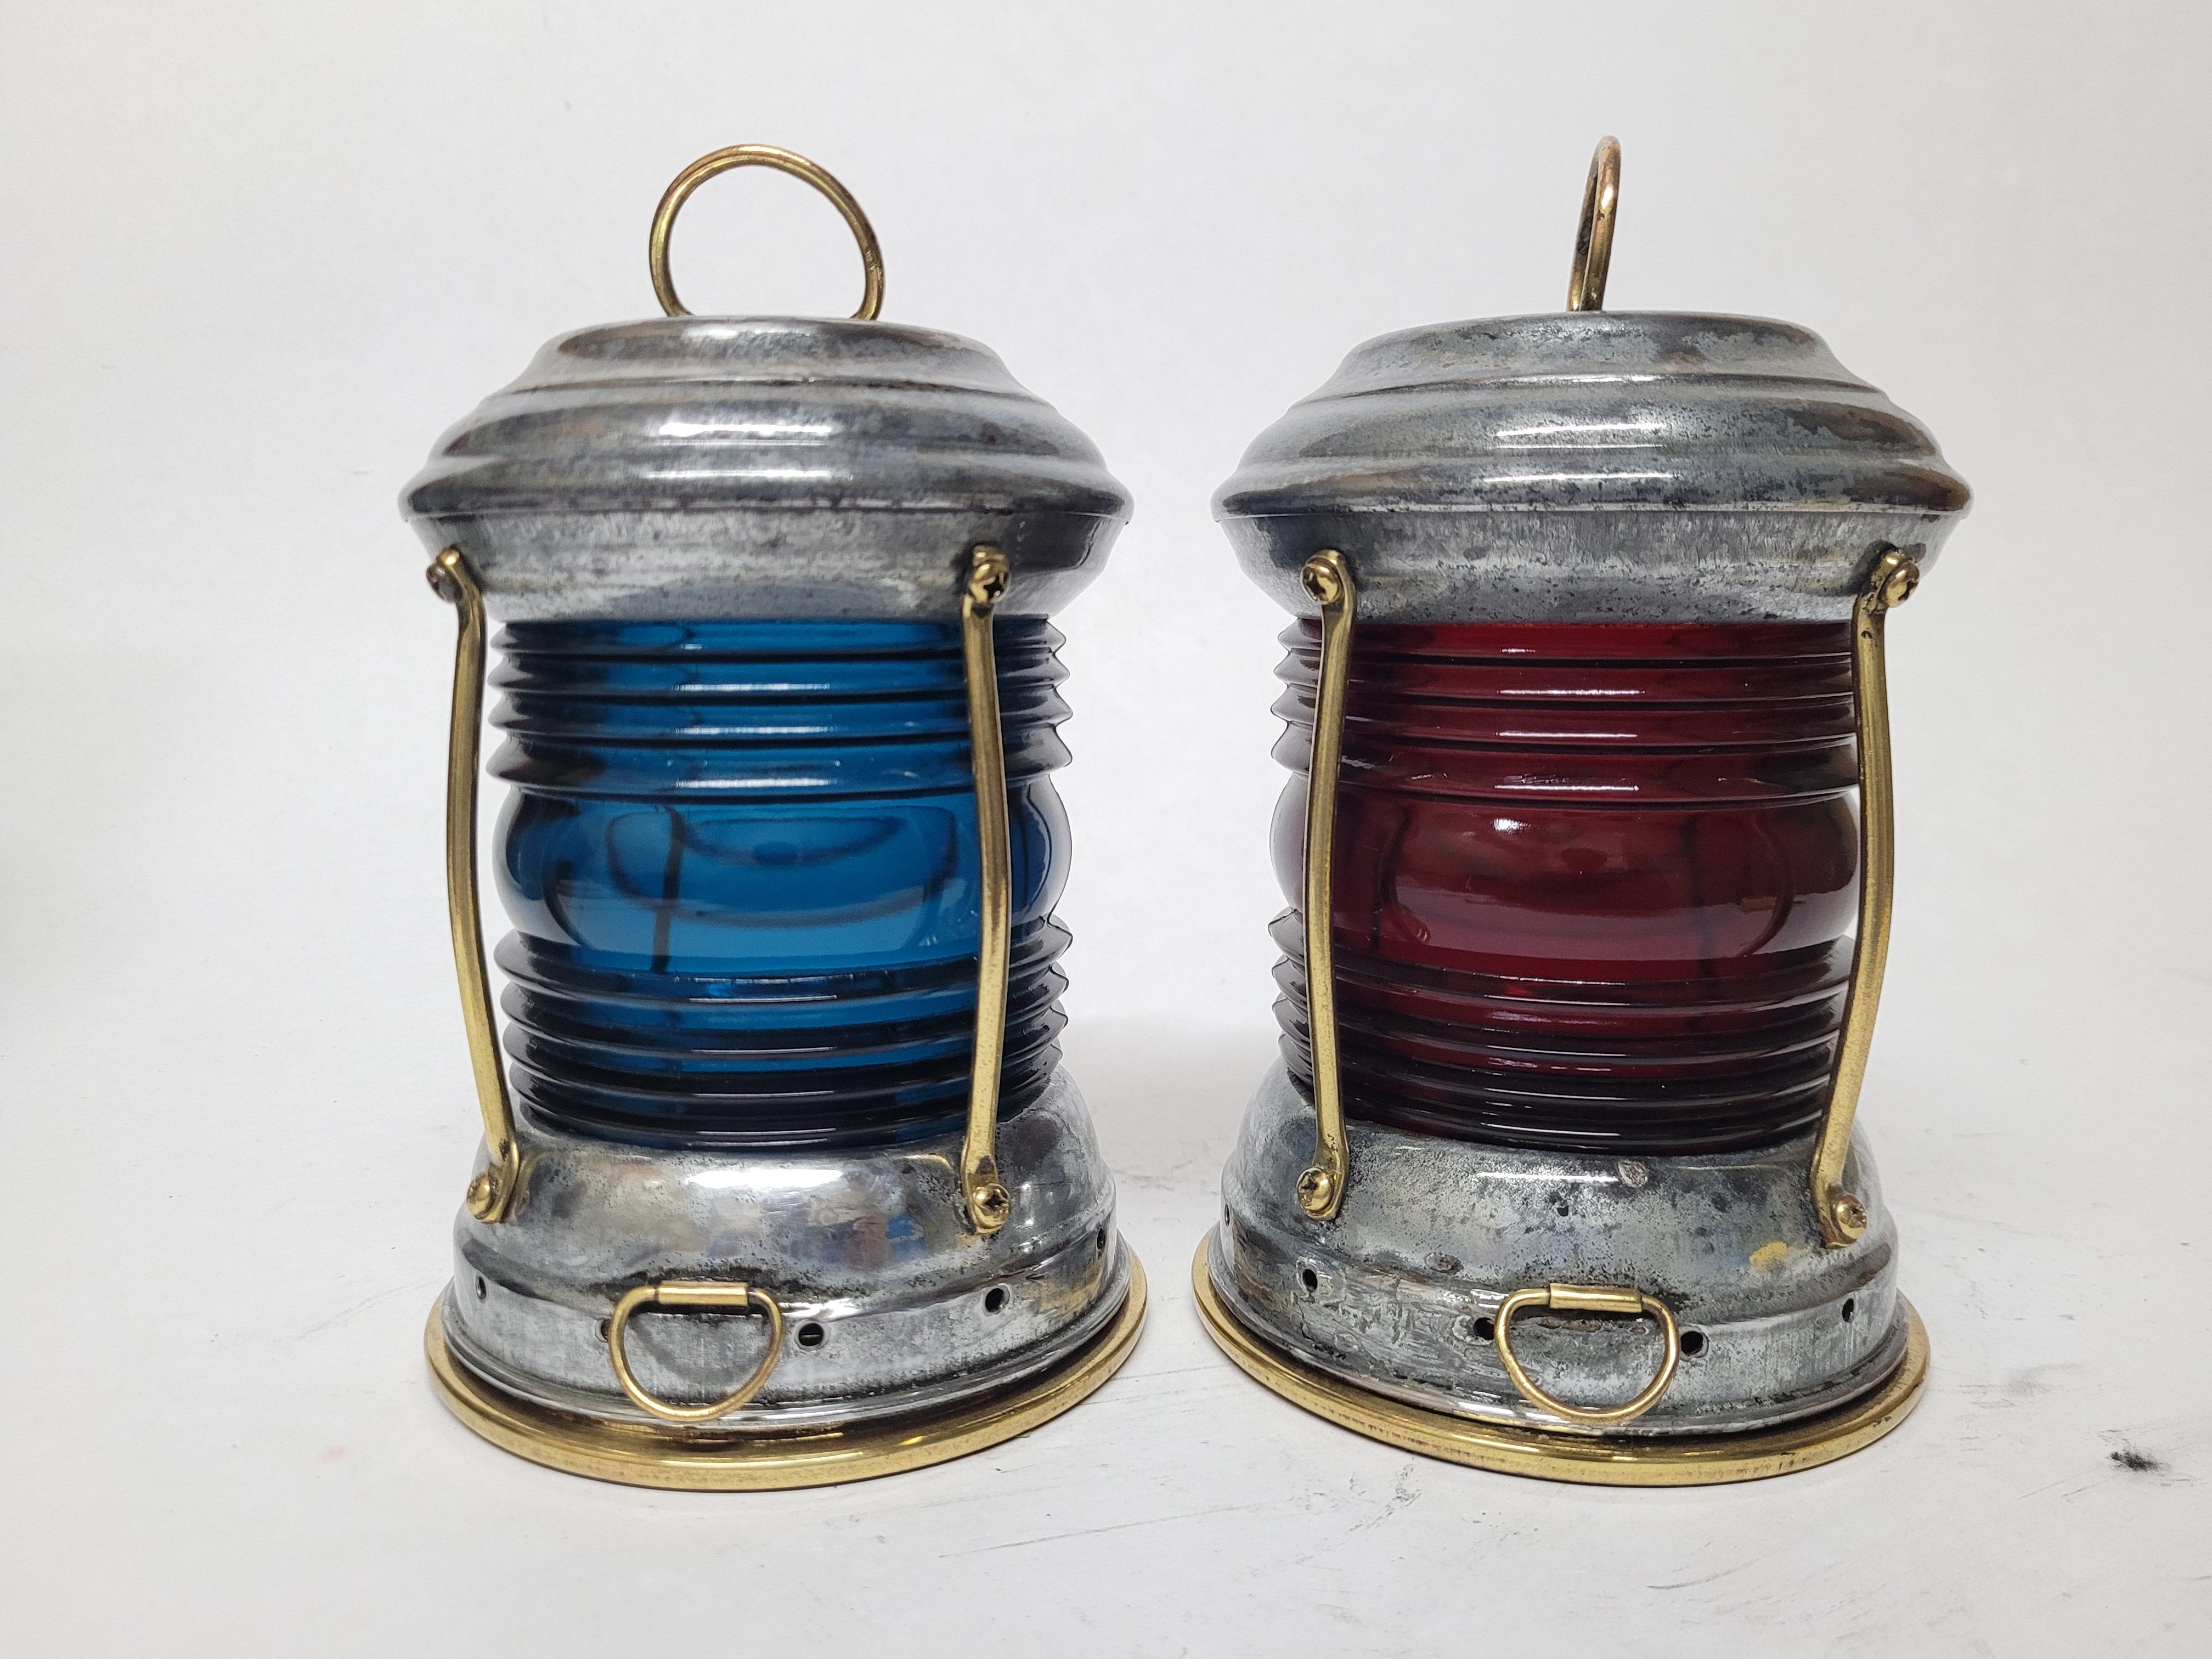 Old pair of boat lanterns with fresnel lenses, steel cases, protective brass bars and carry rings, heavy little things, great bookcase accents.

Weight: 1.78 lbs.
Overall Dimensions: 7 1/2